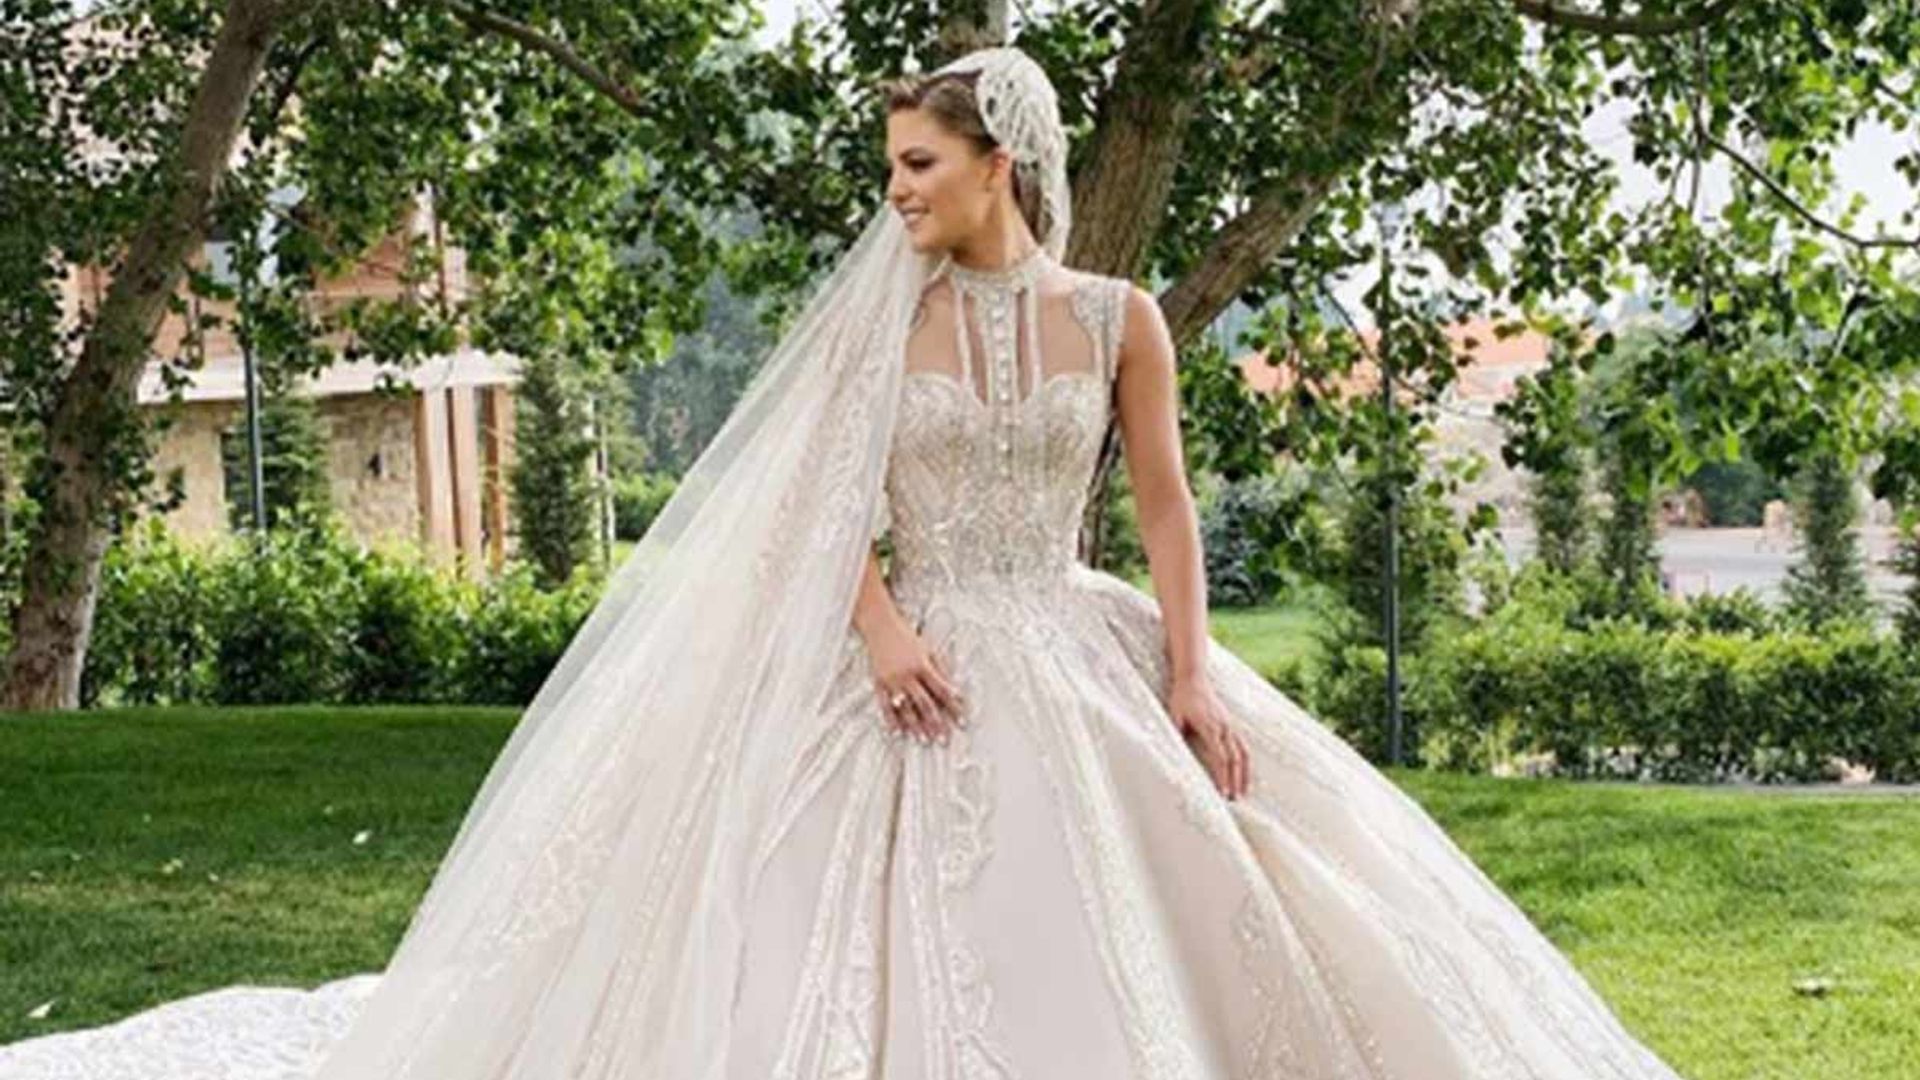 Elie Saab designed 2 dream wedding dresses for his daughter-in-law – with over 1 million sequins